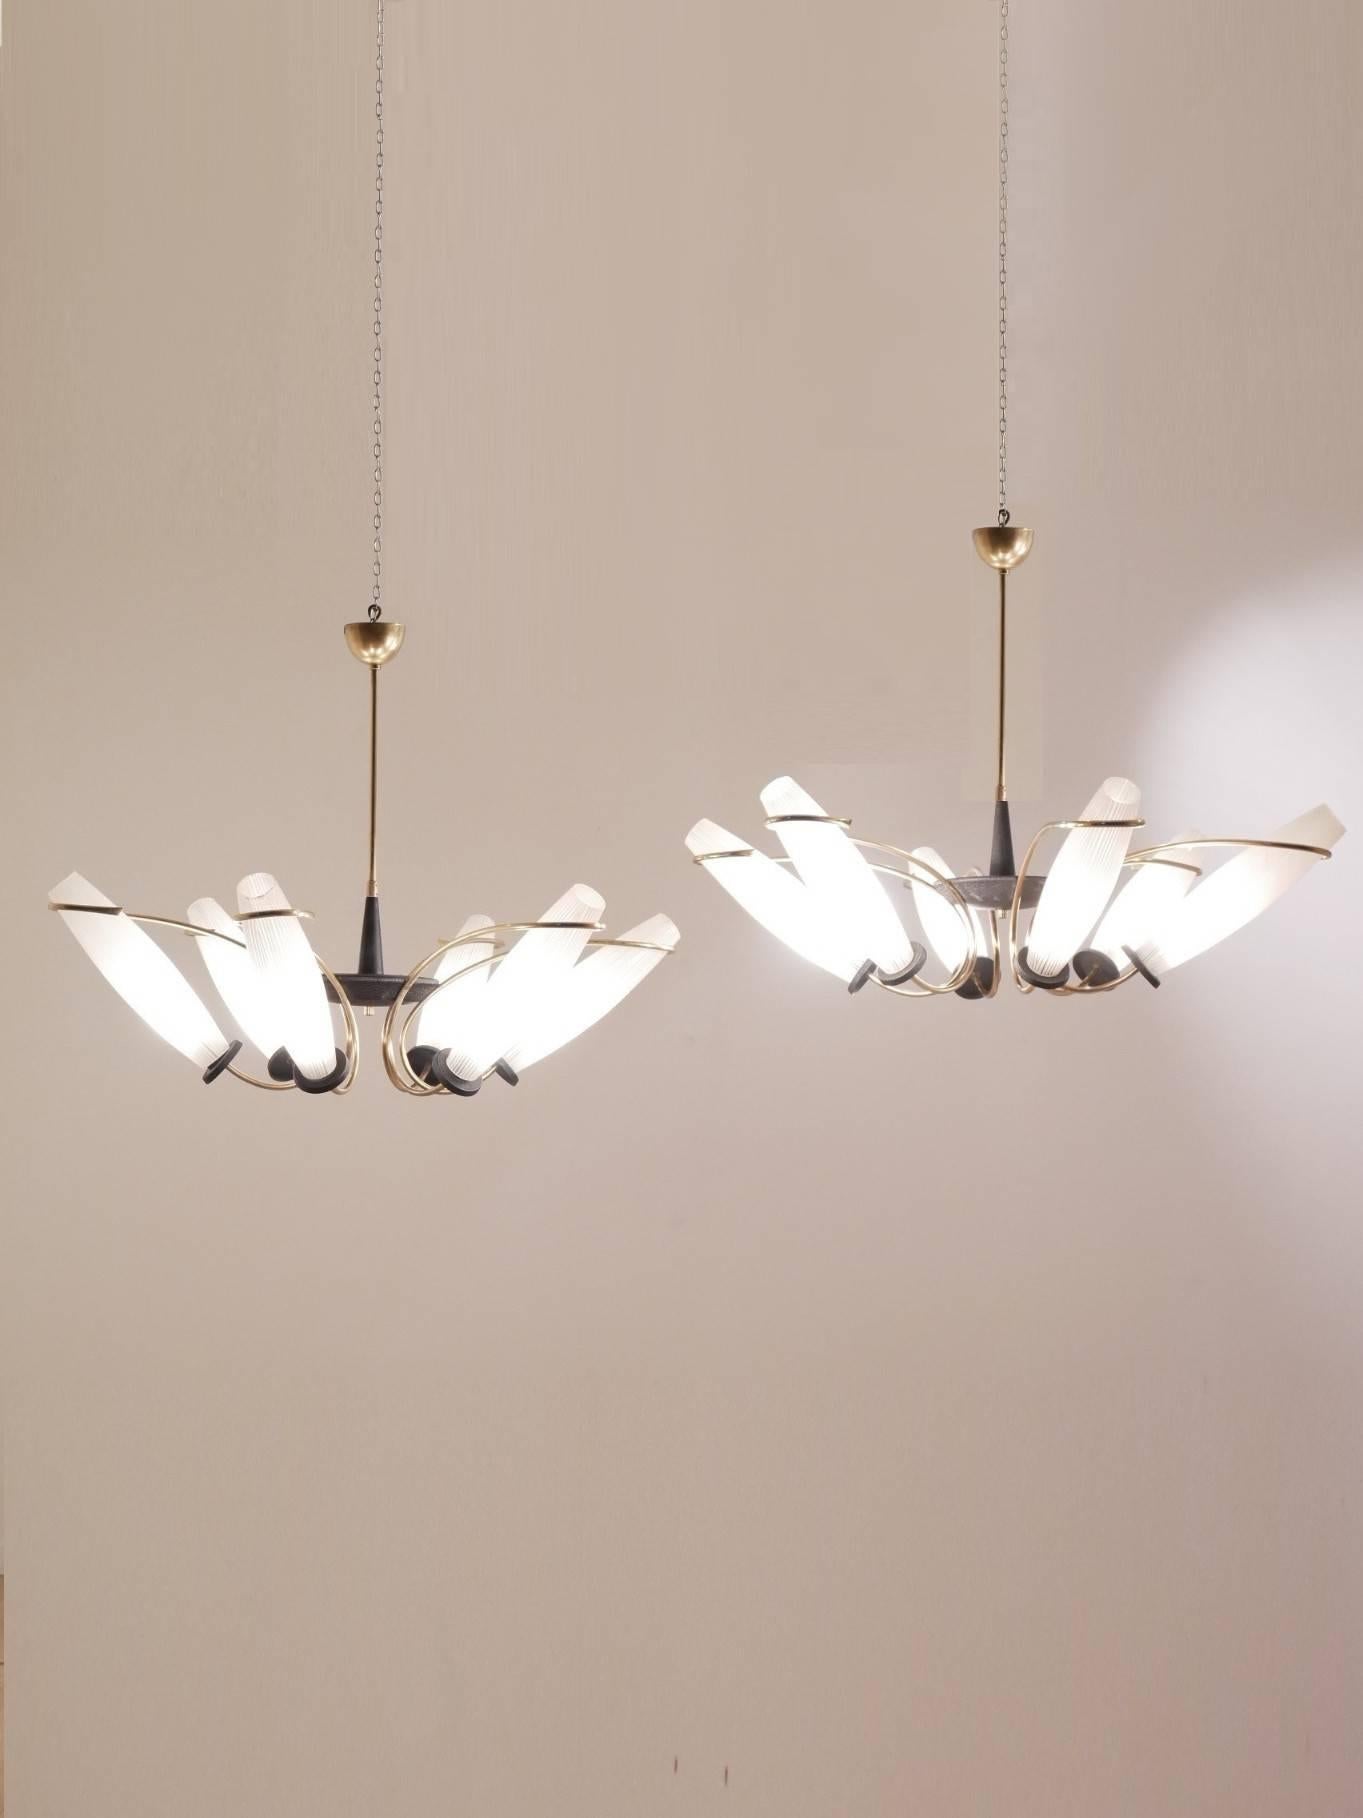 Set of two midcentury chandeliers, originating from Italy, S-shaped brass structures holding etched glass diffusers and mounted on painted metal parts.
One has a black metal parts paint, the other a dark grey one.